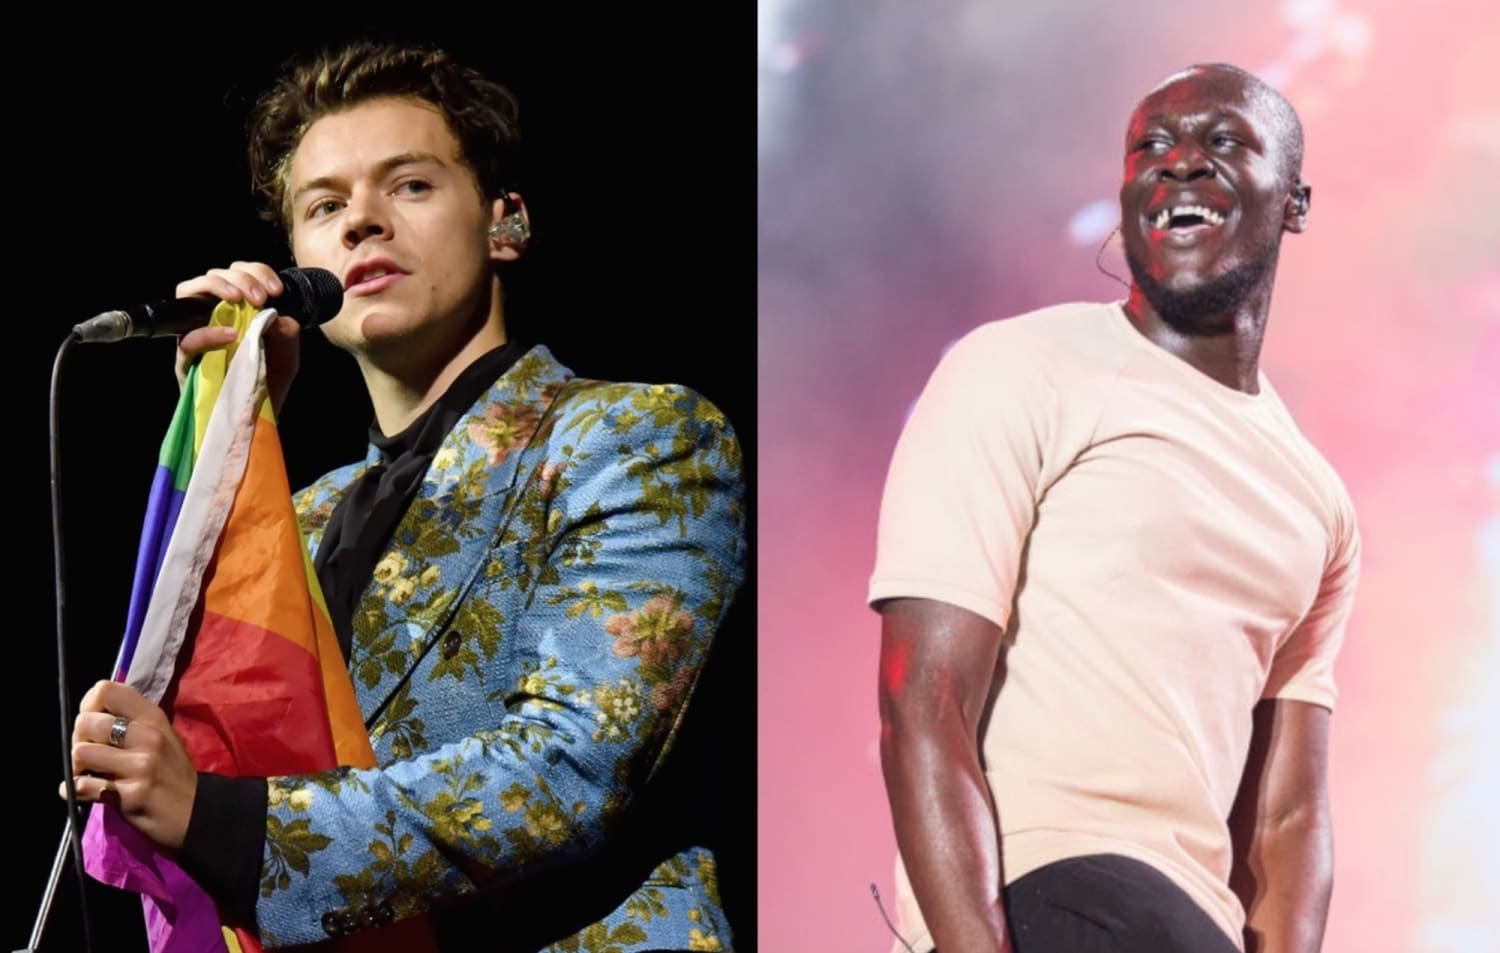 Watch Harry Styles cover Lizzo and bring out Stormzy at secret London gig